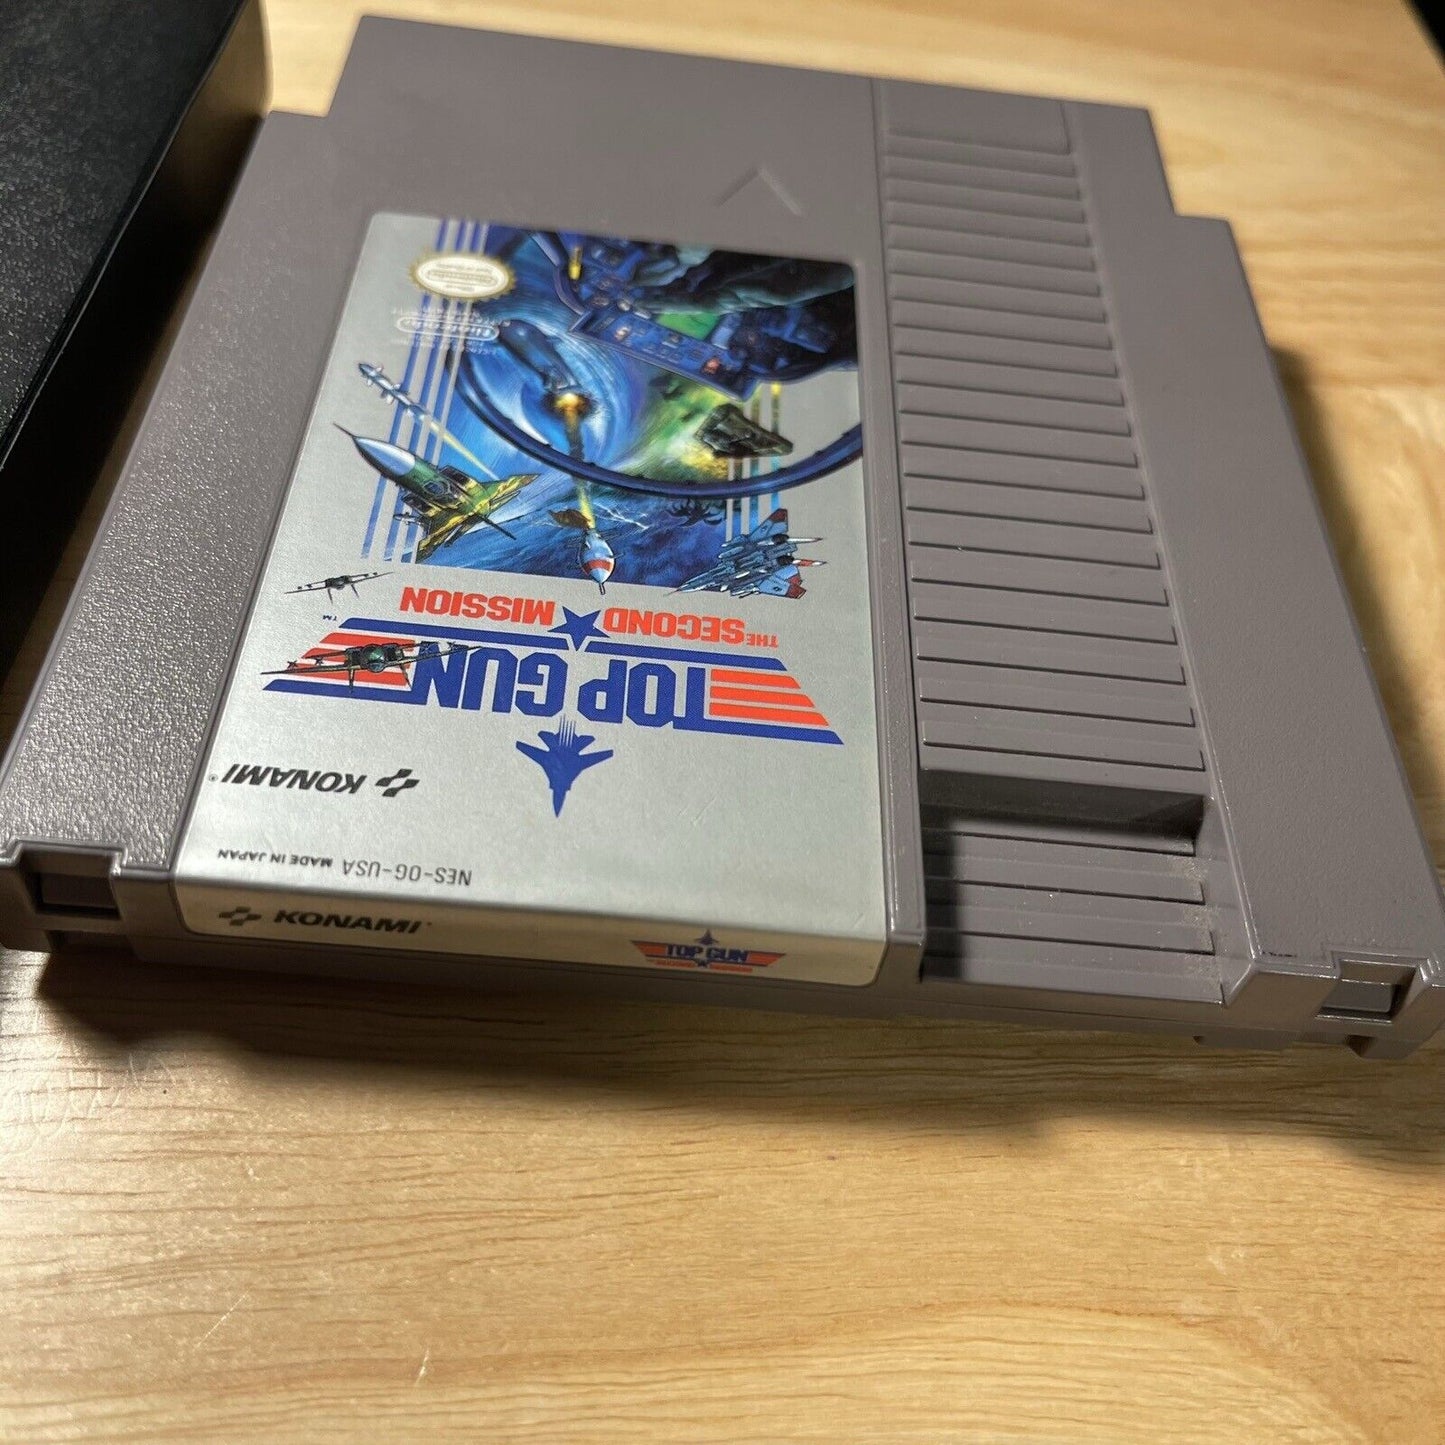 Top Gun 2 - The Second Mission ORIGINAL Nintendo NES GAME Tested + Working!